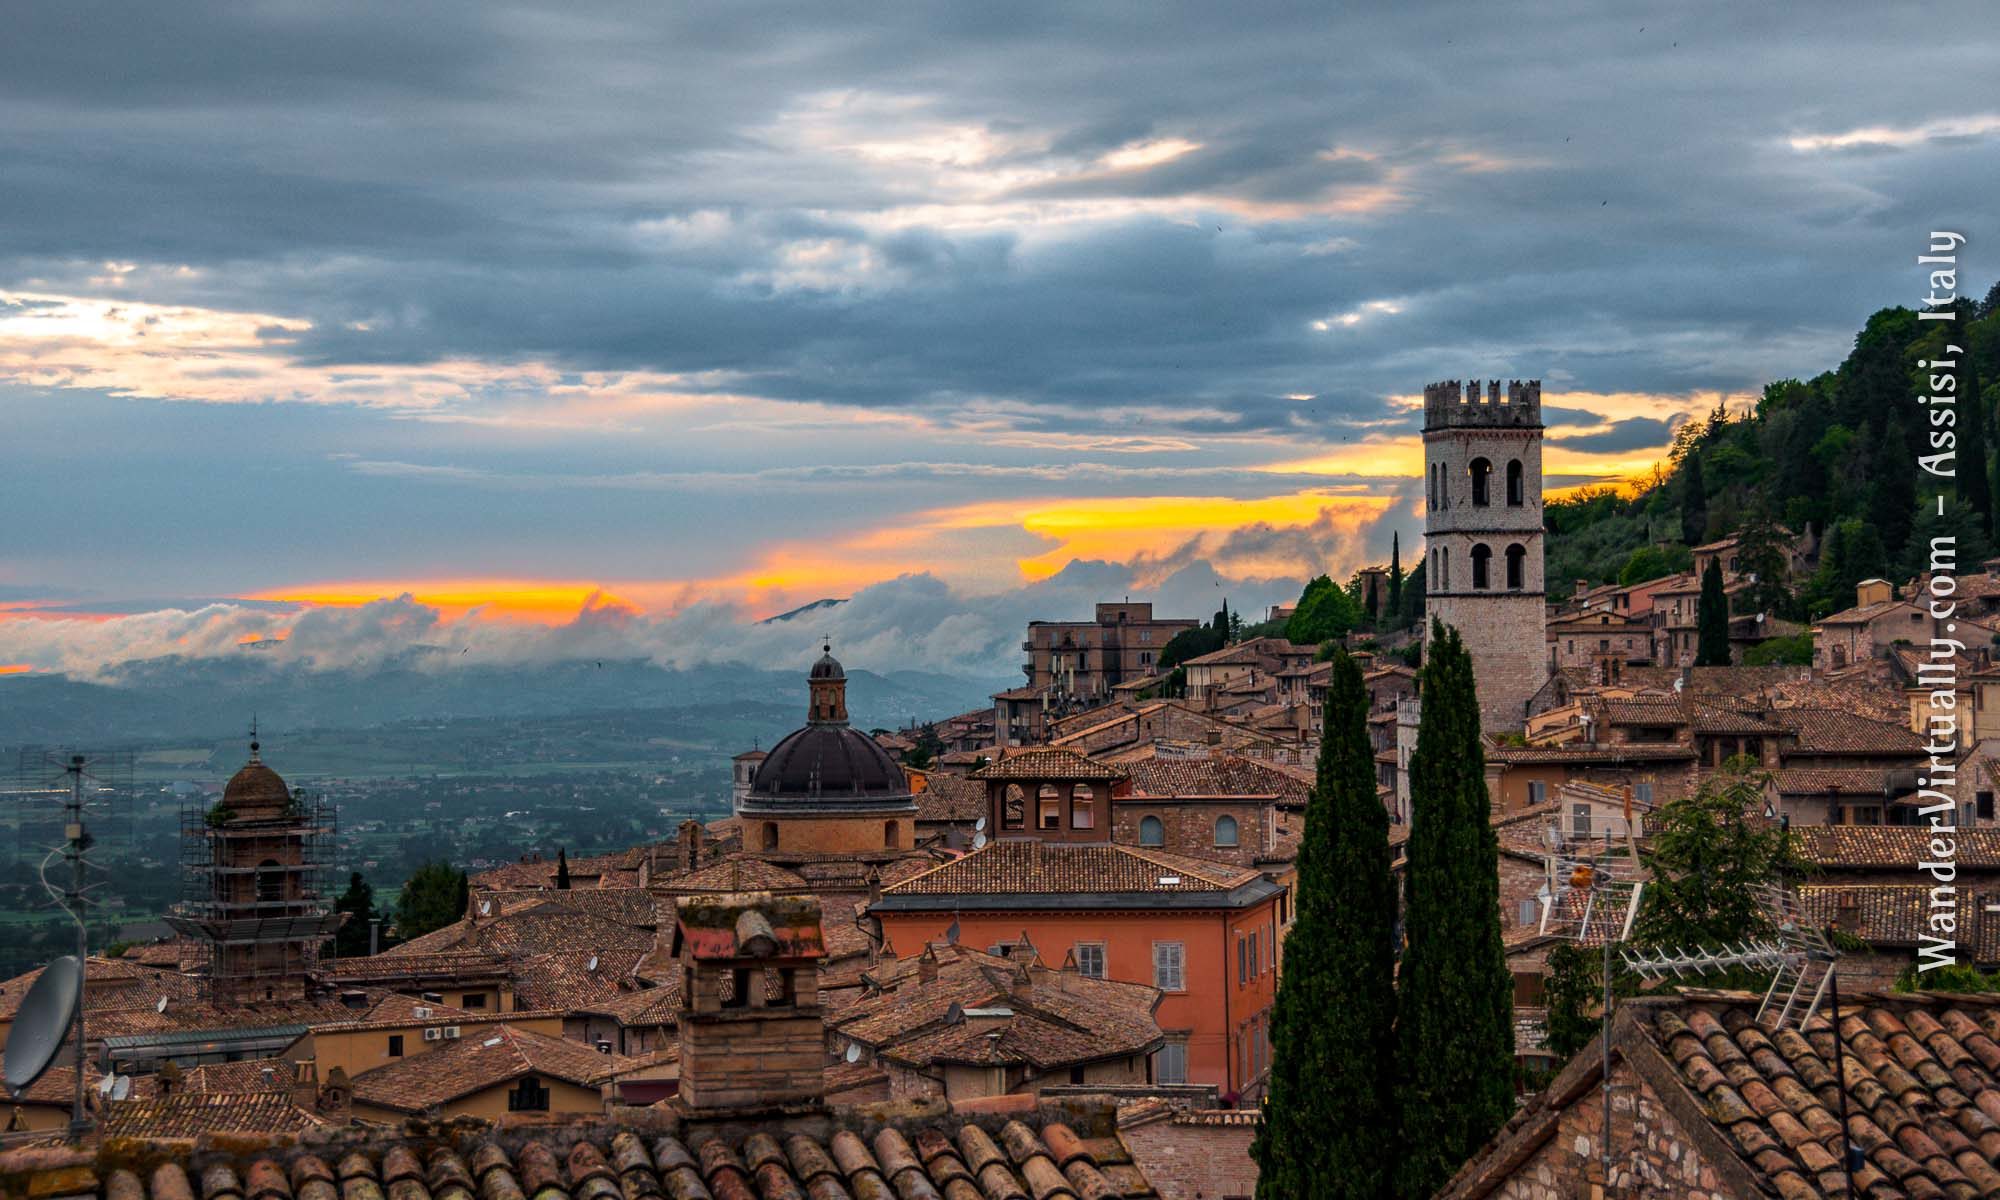 Scenes from Assisi, Italy. View of Assisi skyline at sunset